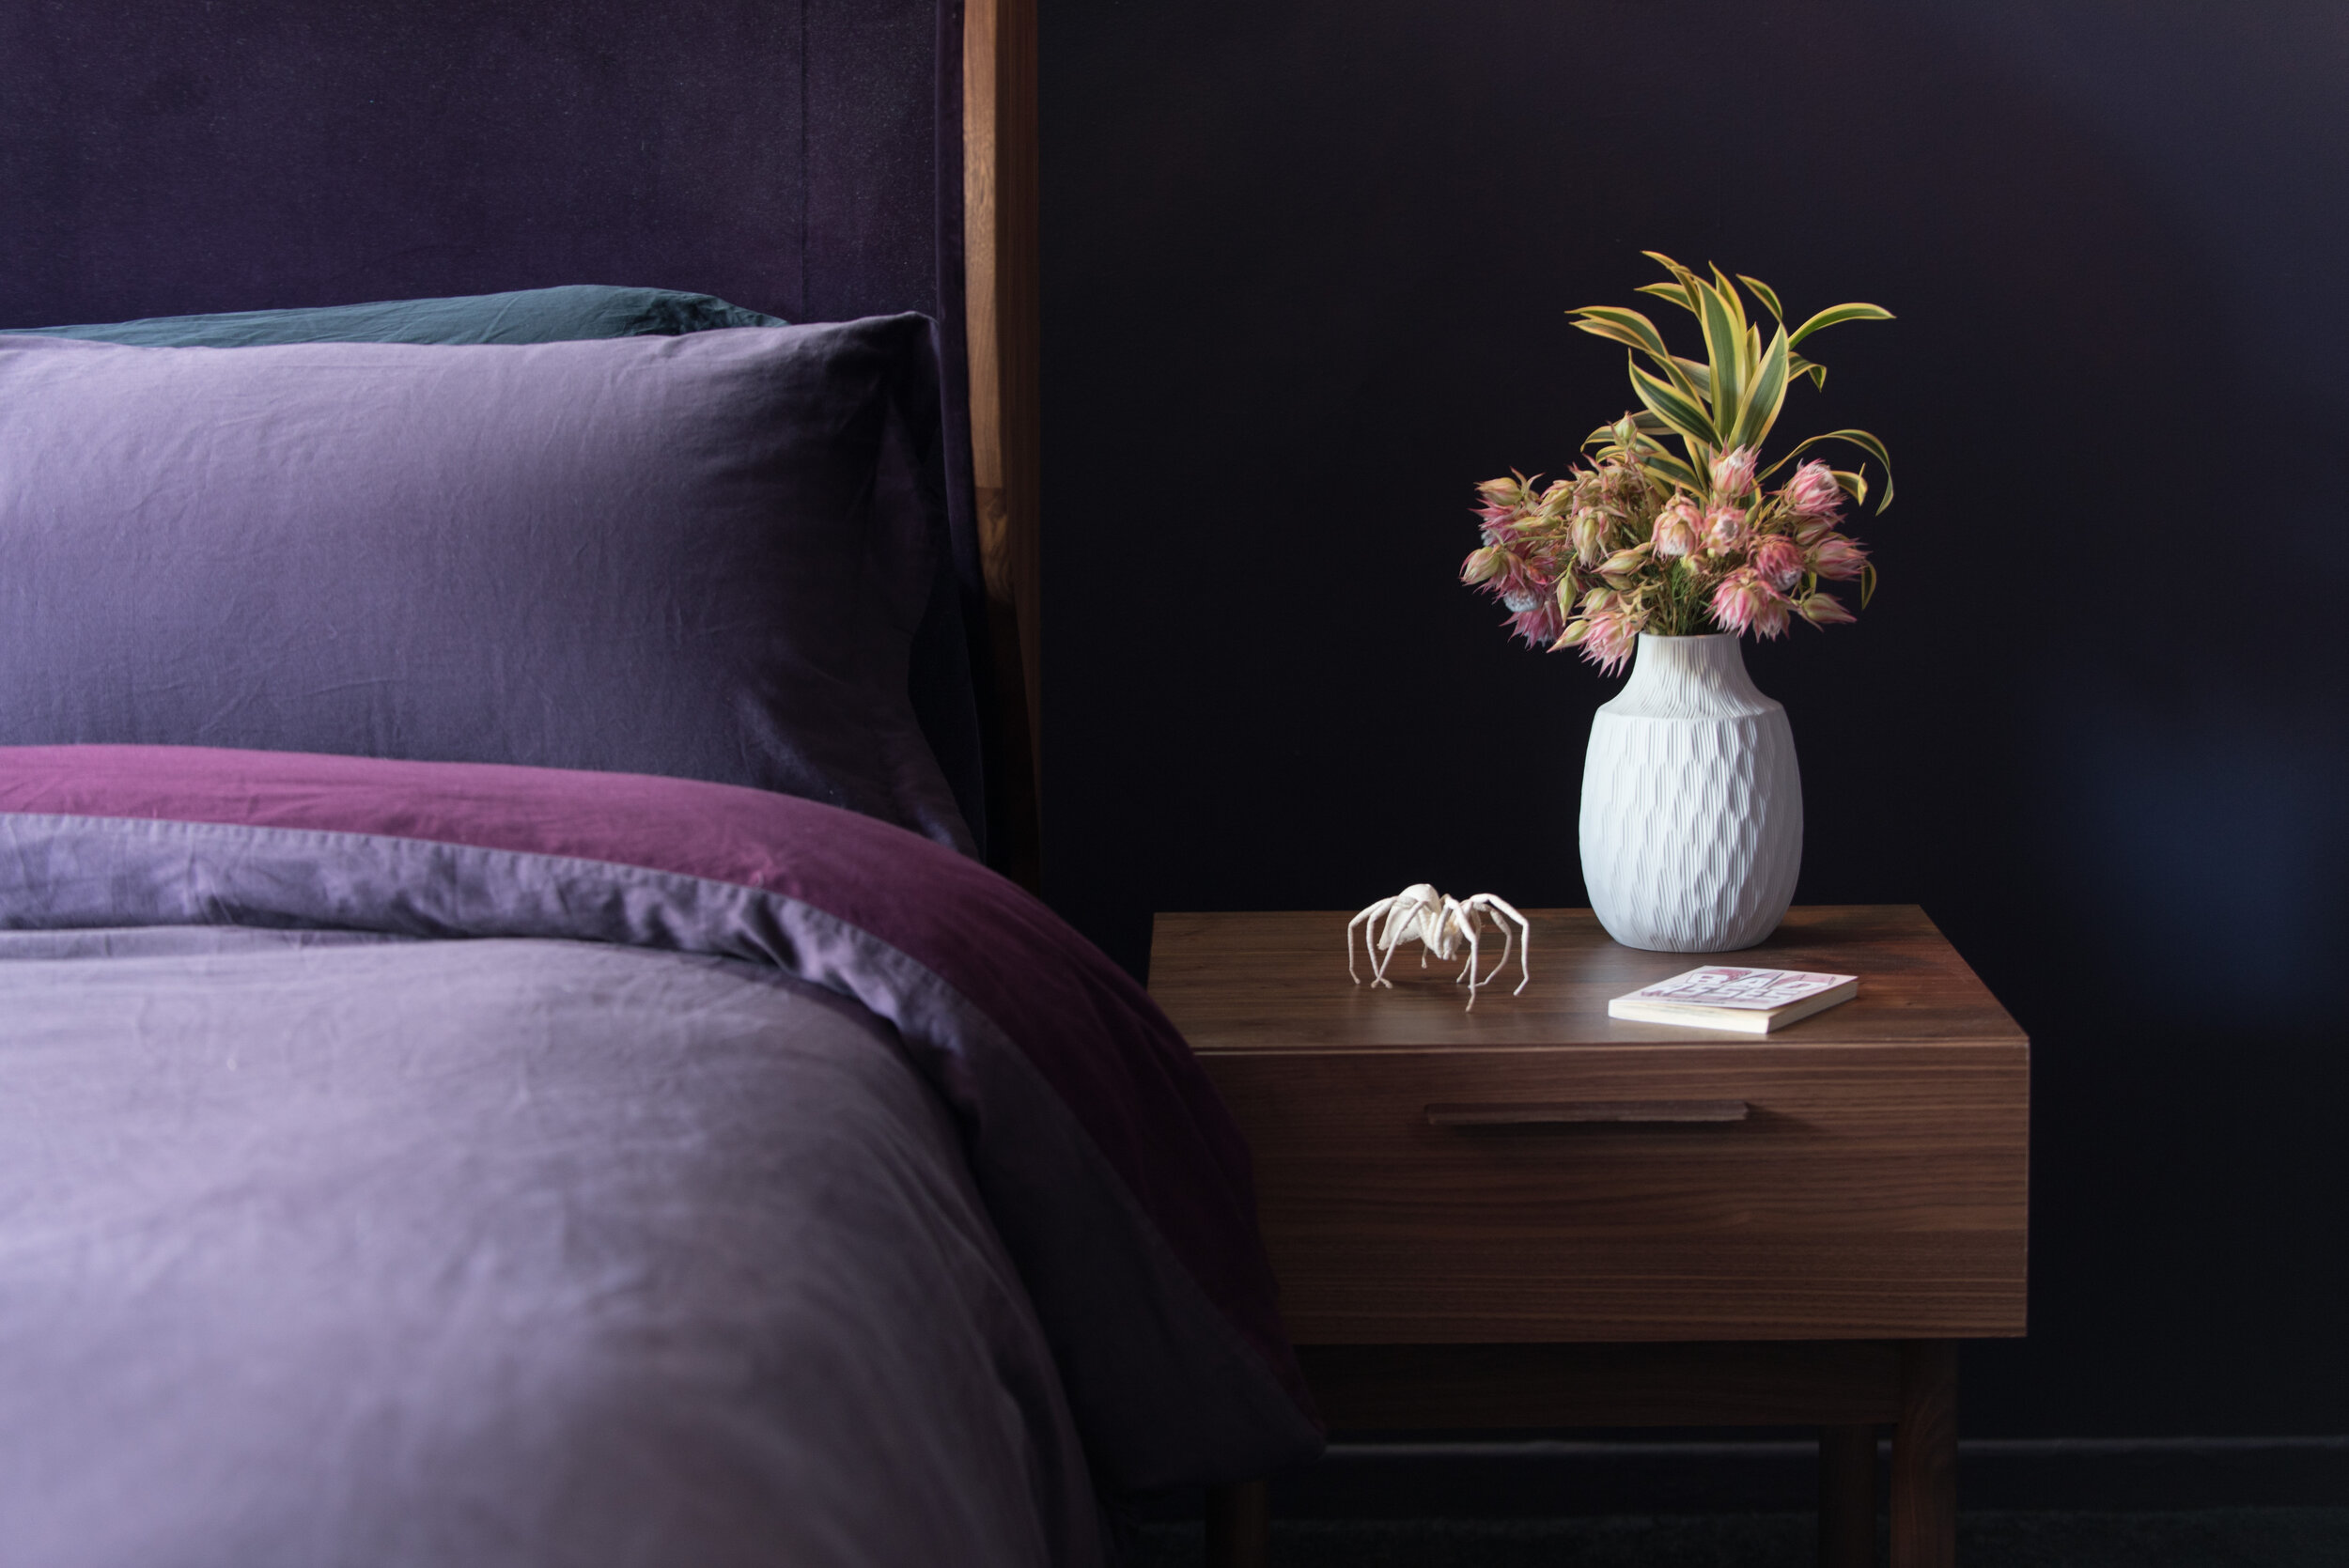 Purple bed against darker purple wall, wooden side table with white vase and pink flowers, and white spider sculpture